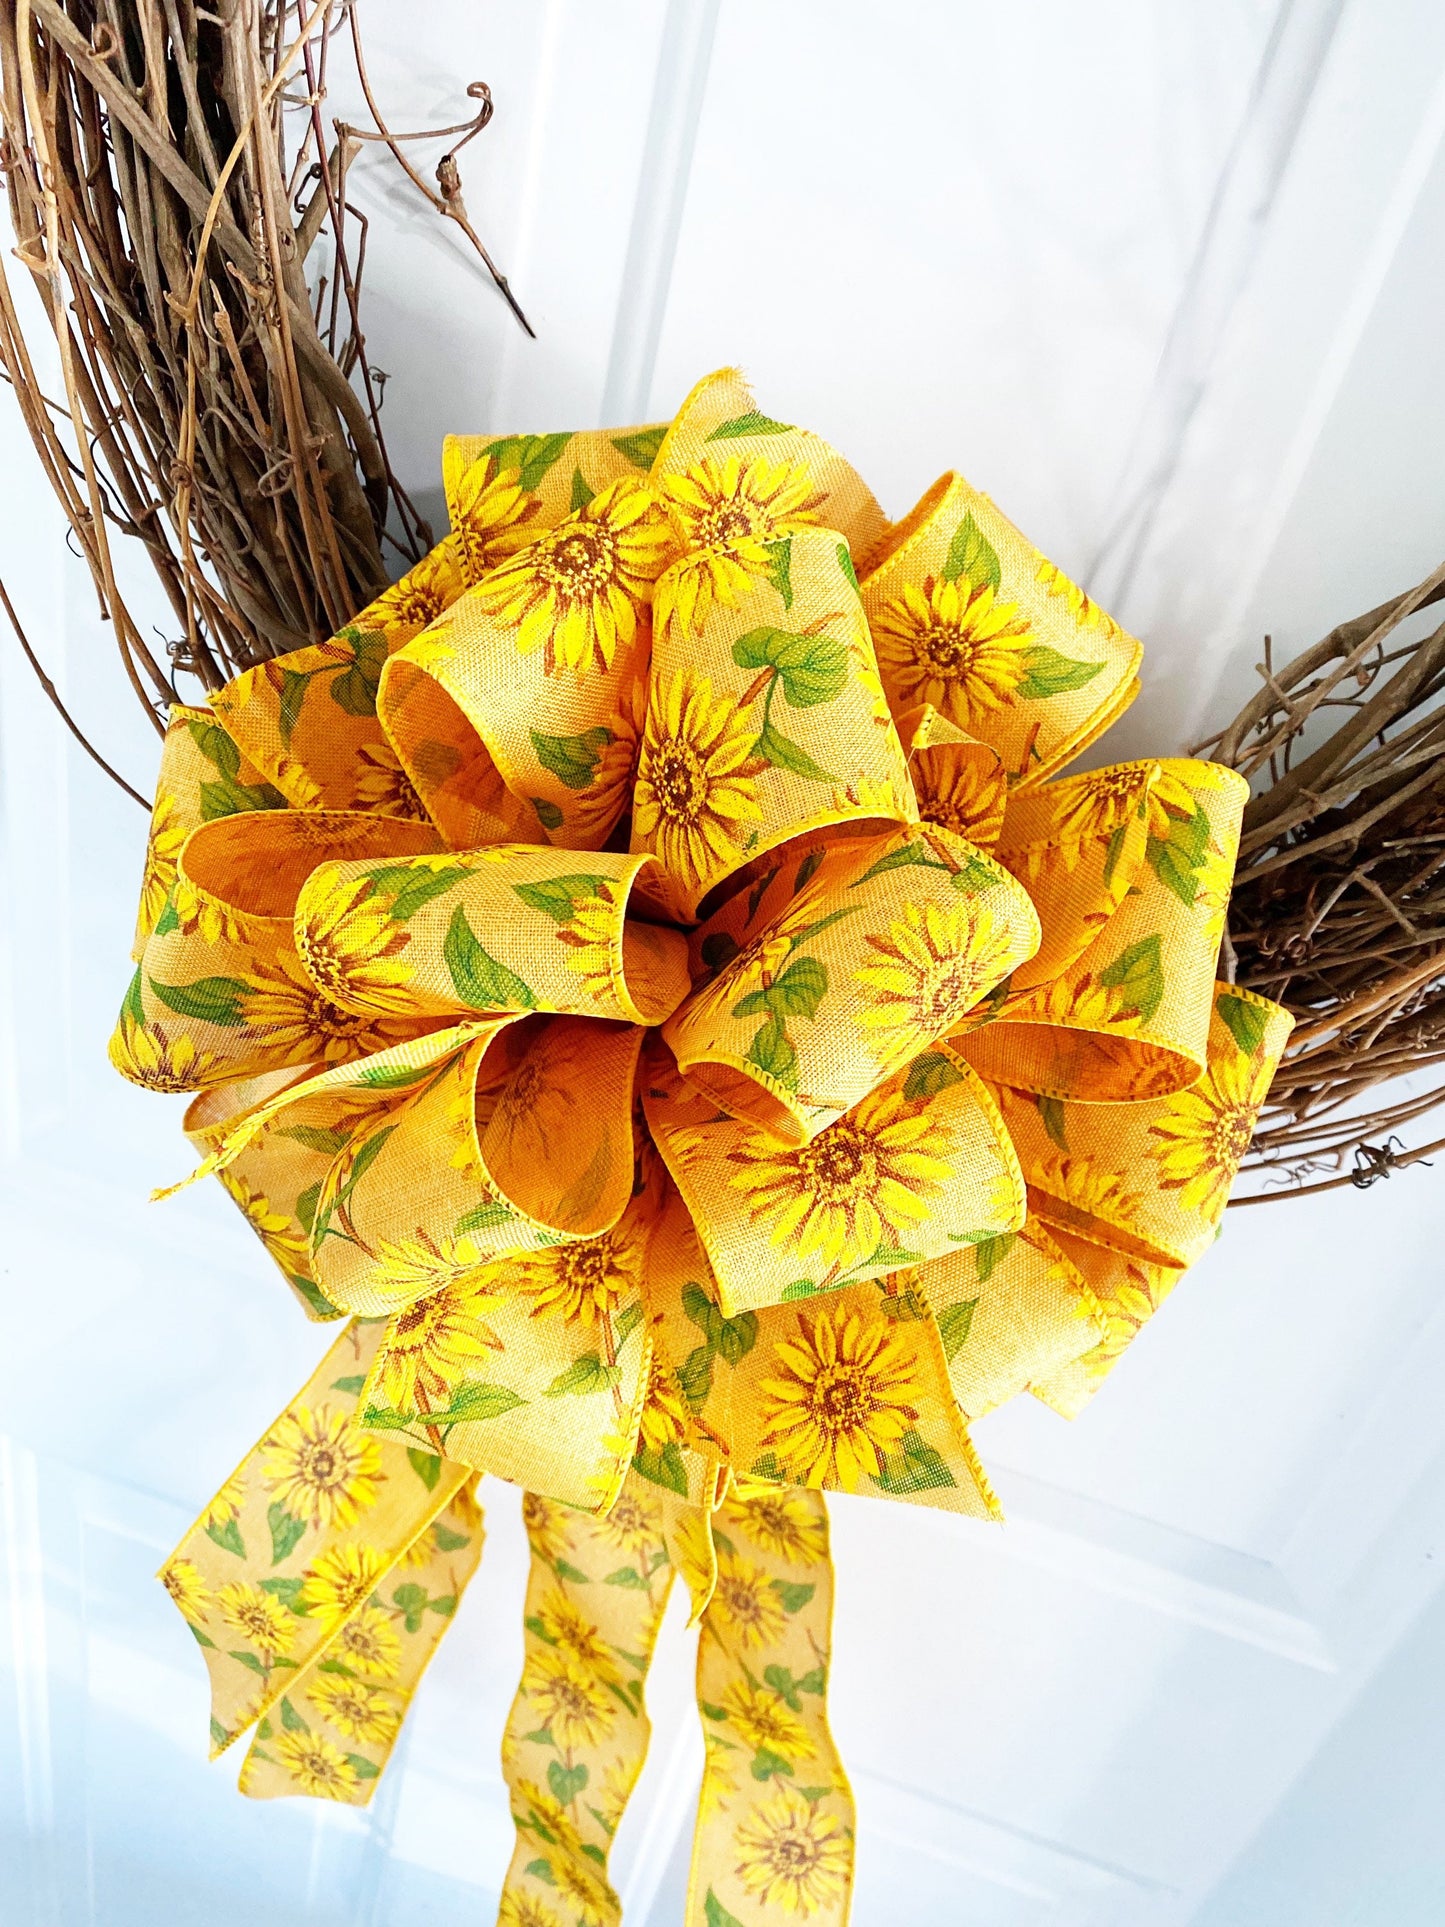 Everyday Collection - Sunflower,Sunflower Bow,Sunflower Ribbon,Ukraine,Ukraine Bow, Sunflower Decor,Mailbox Bow,Wreath Bow, Tree Topper